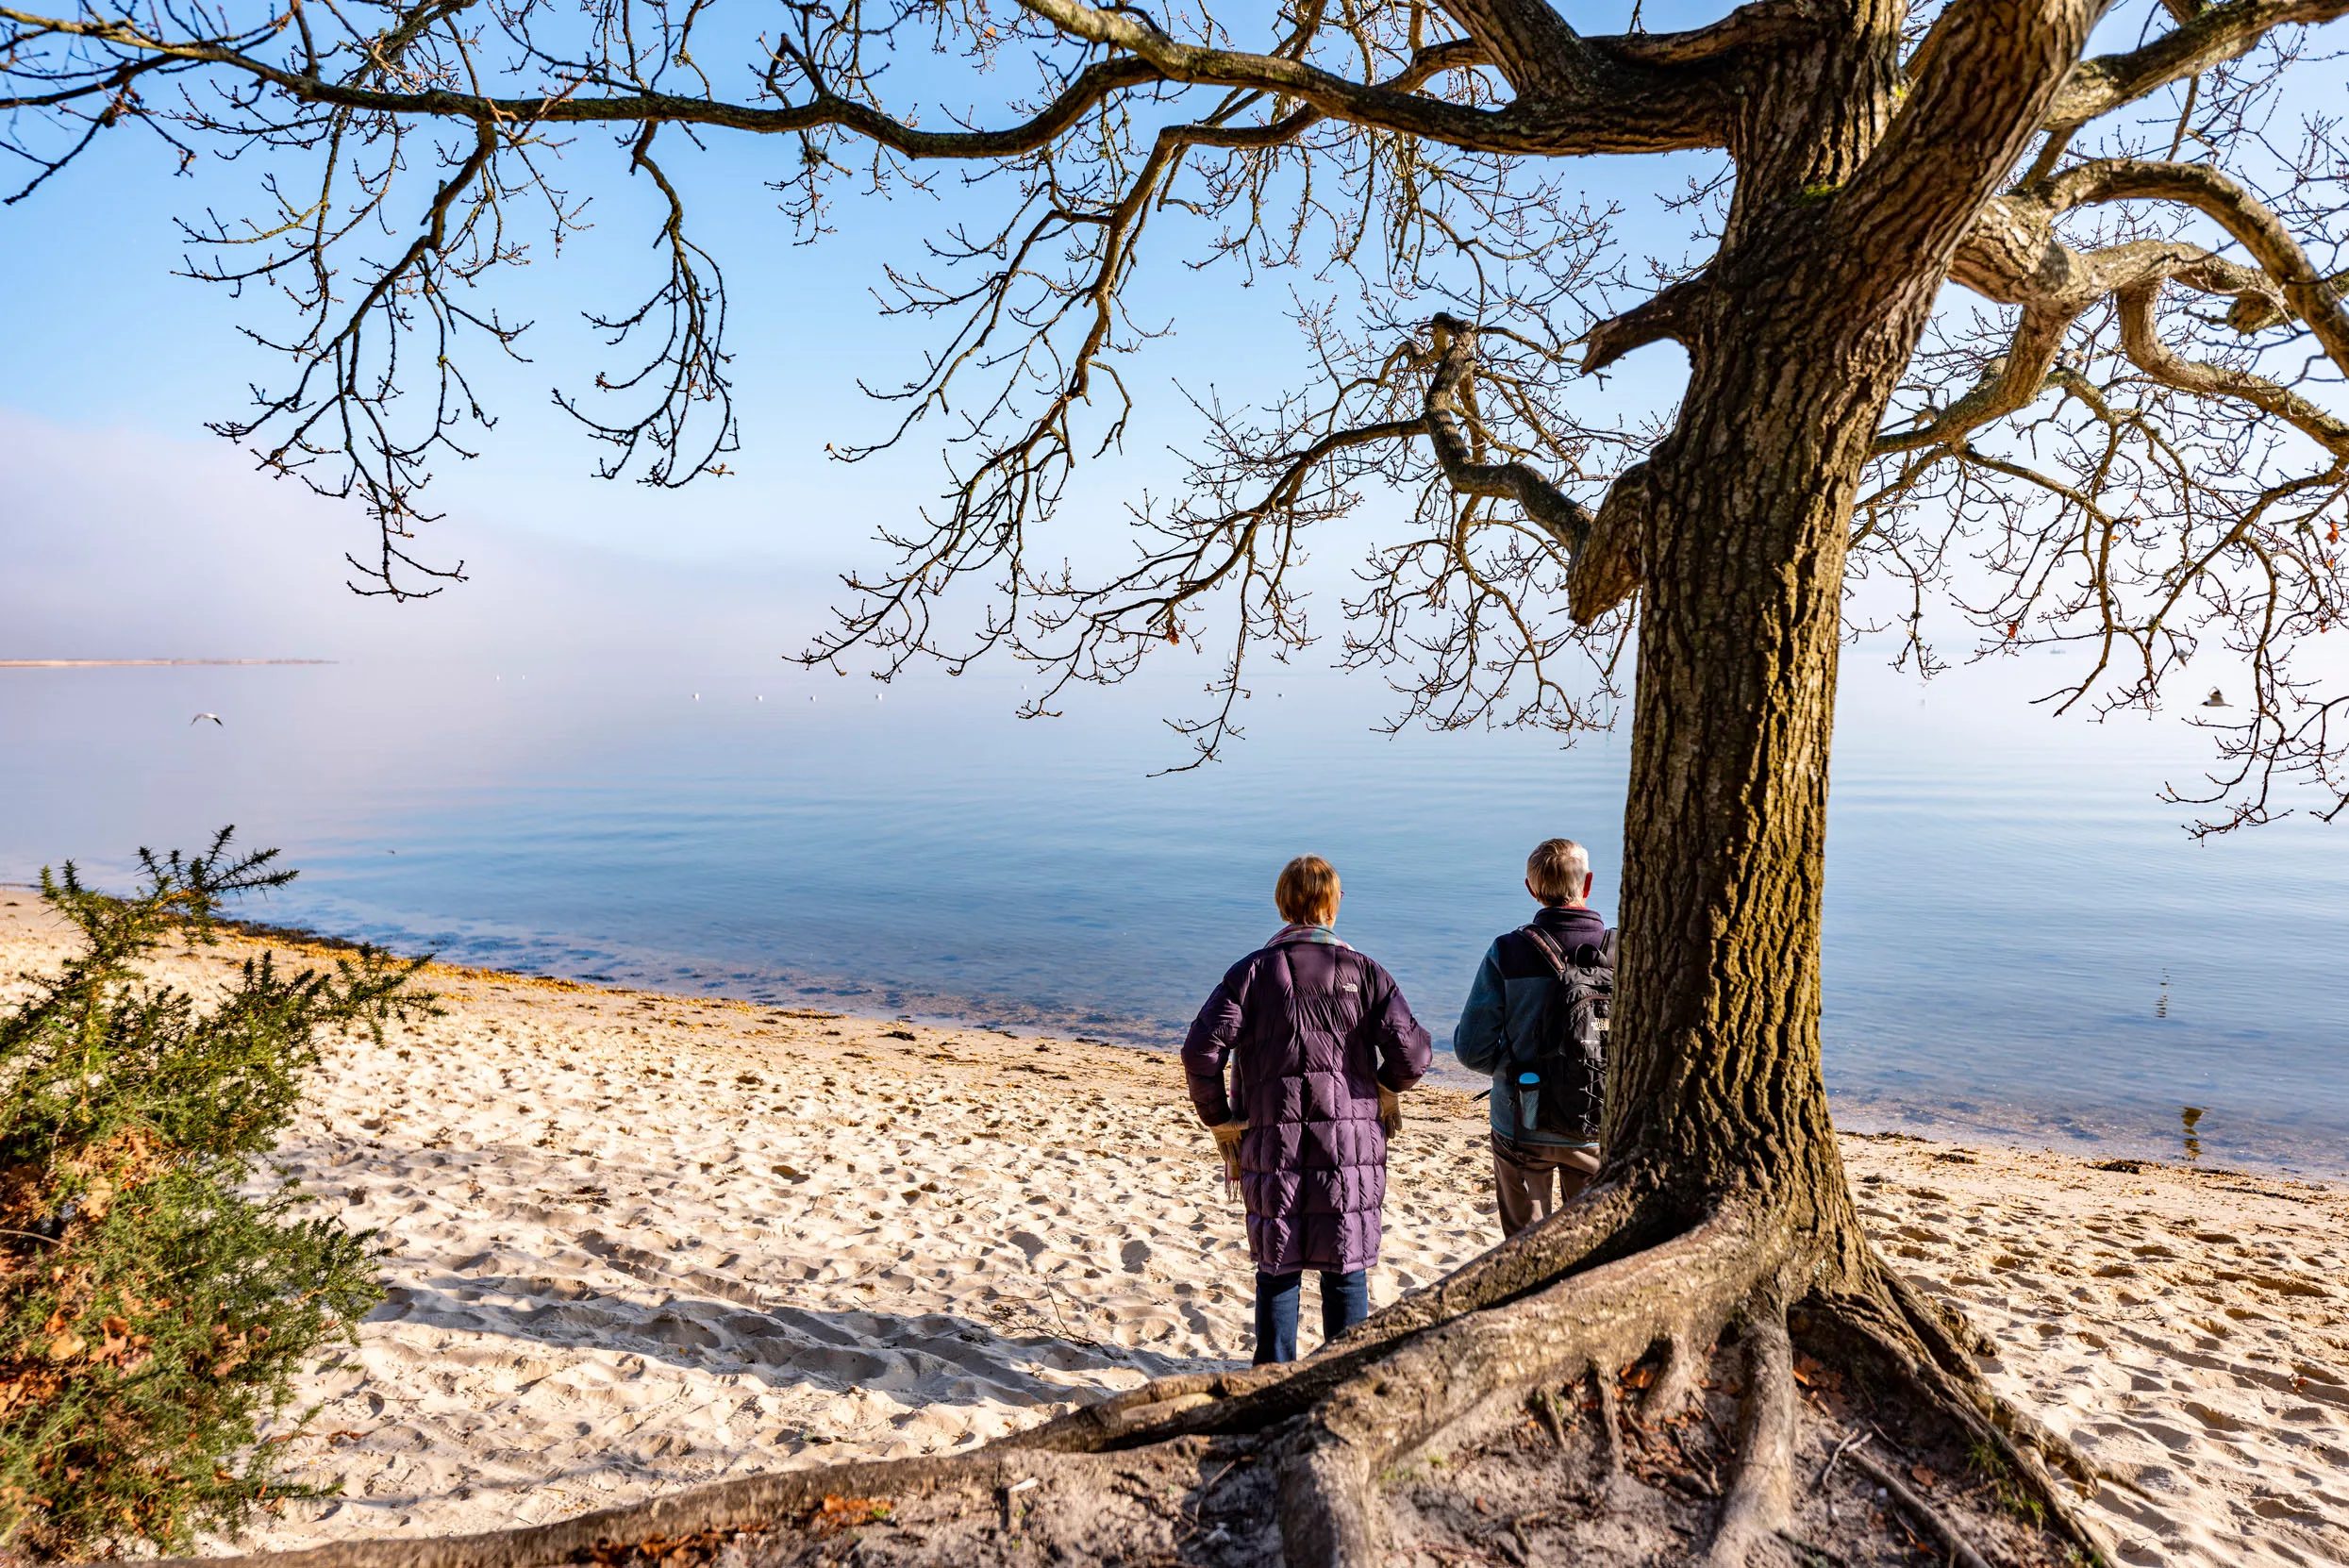 Two people stood on Arne beach looking out over the sea, with a tree behind them.